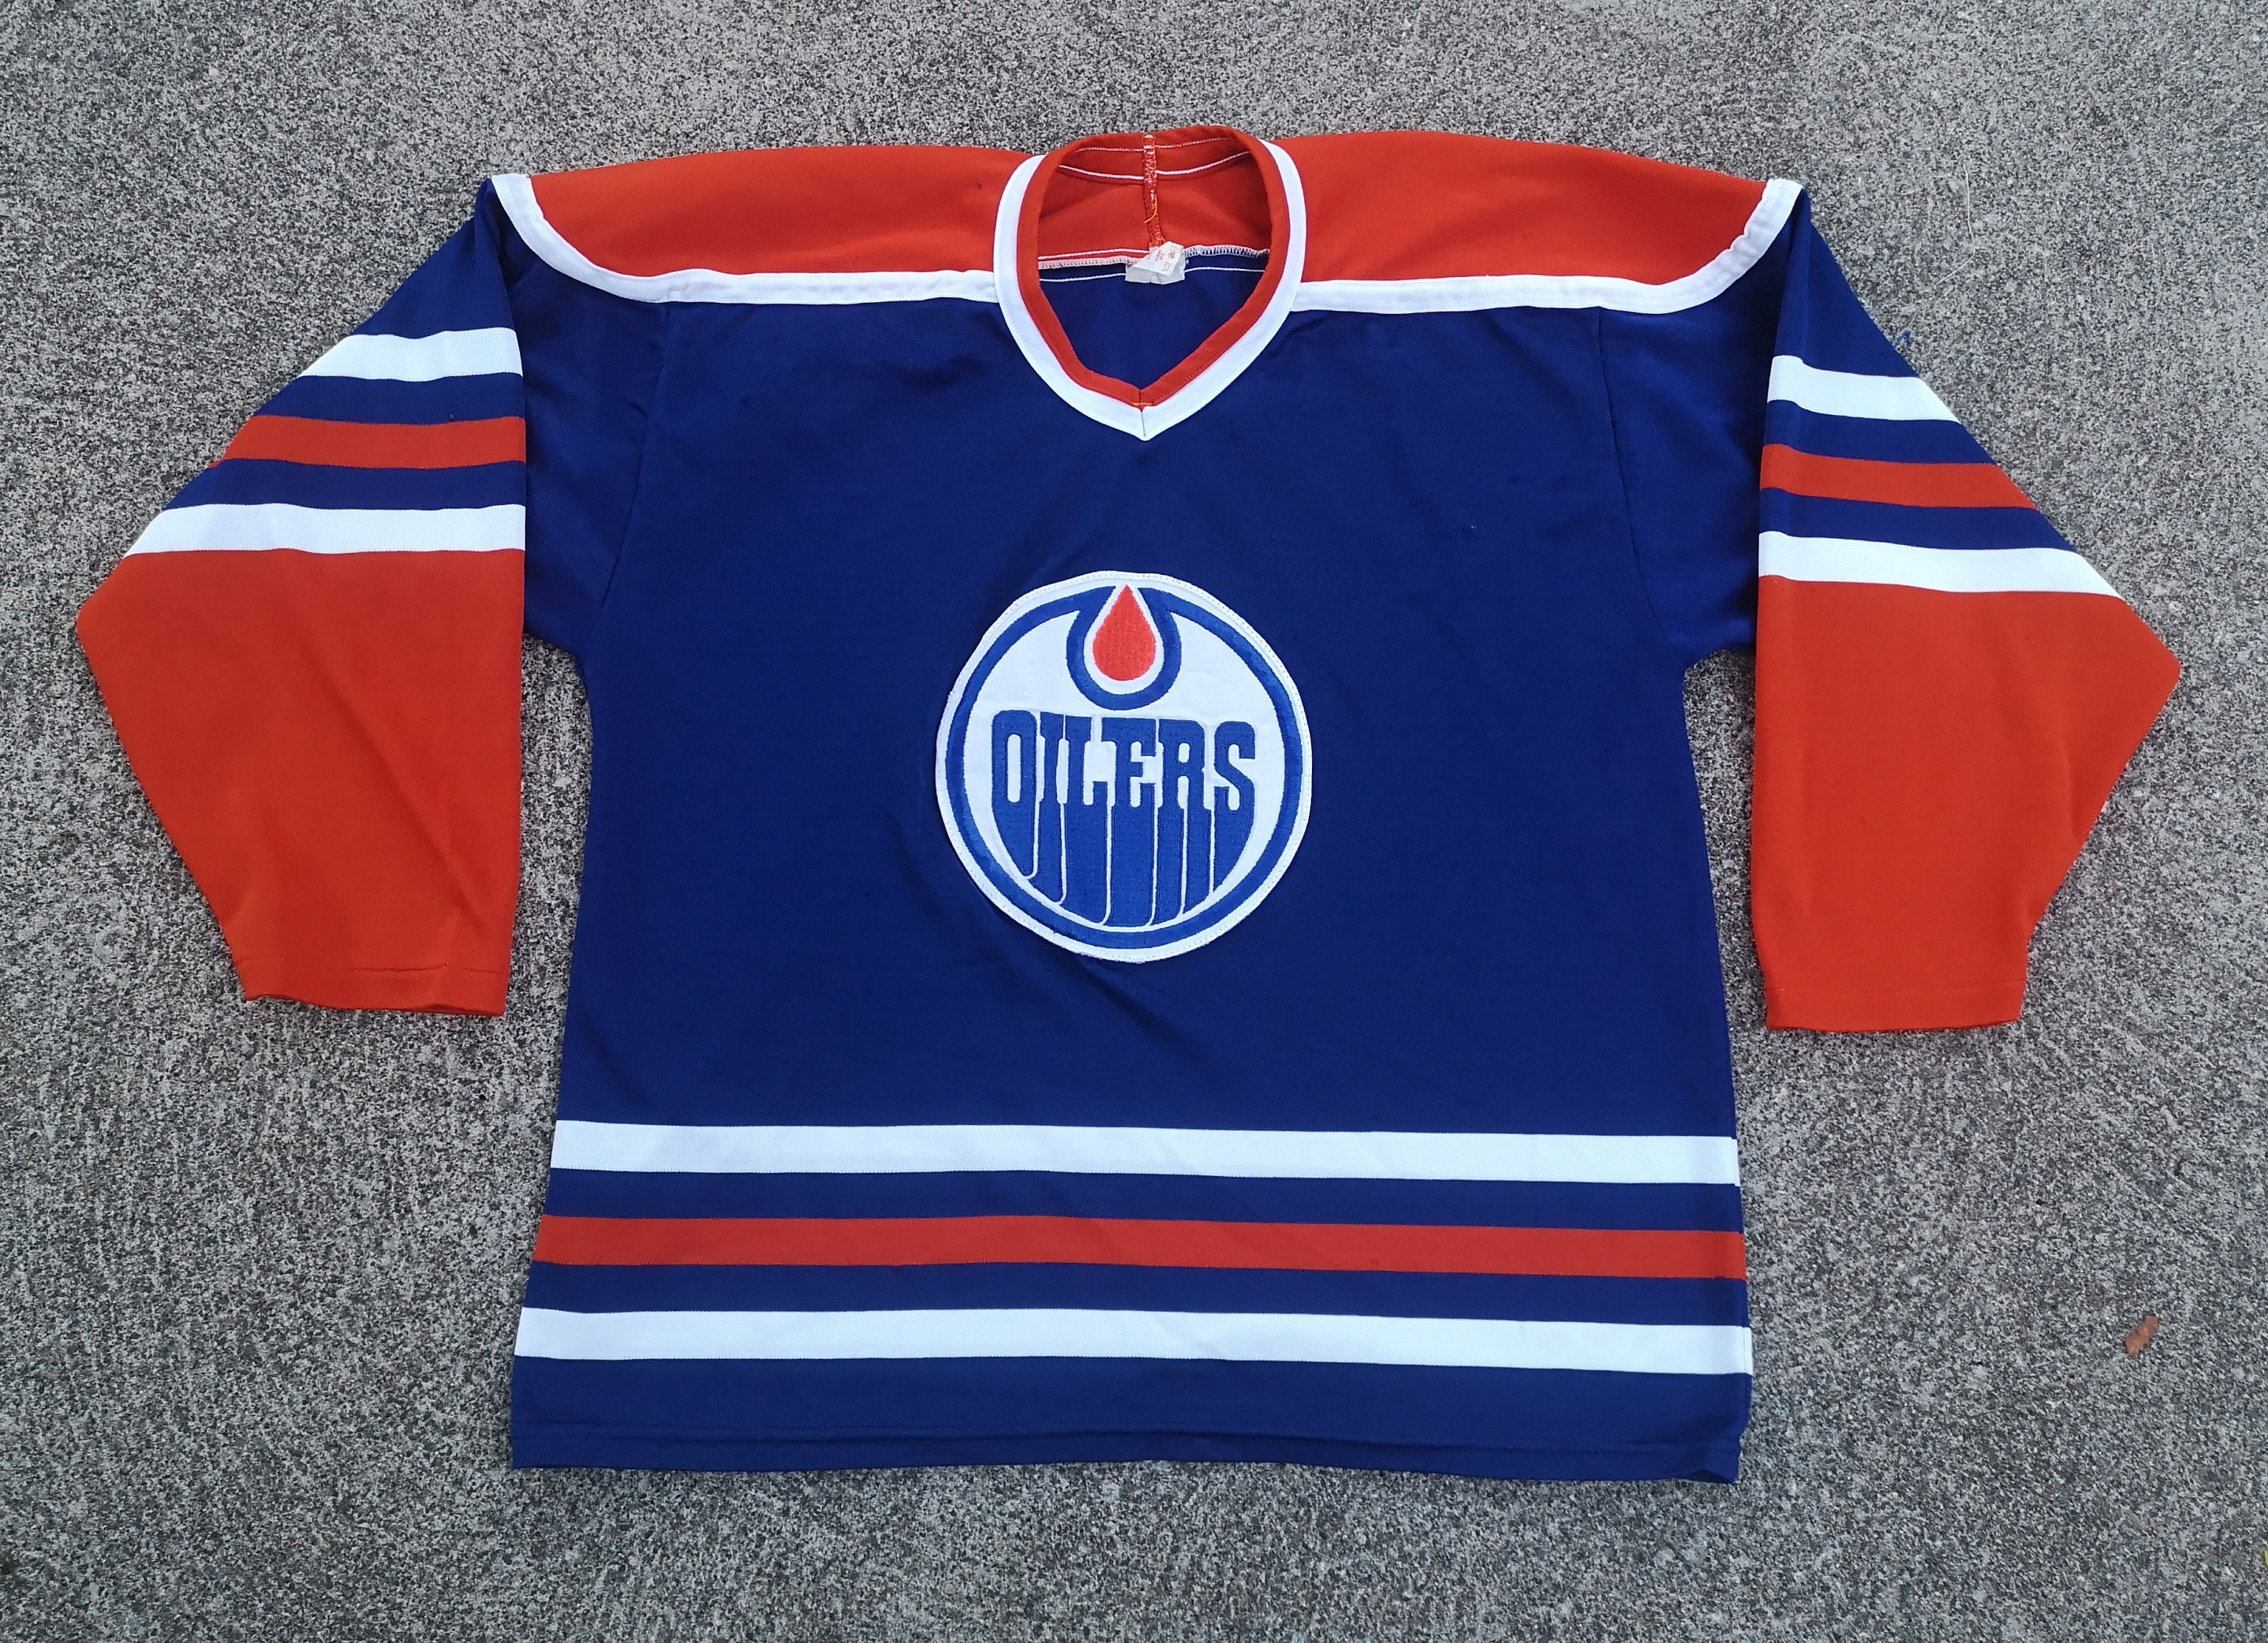 Authentic Vintage Canadian Hockey Oilers Red/blue Jersey Top 